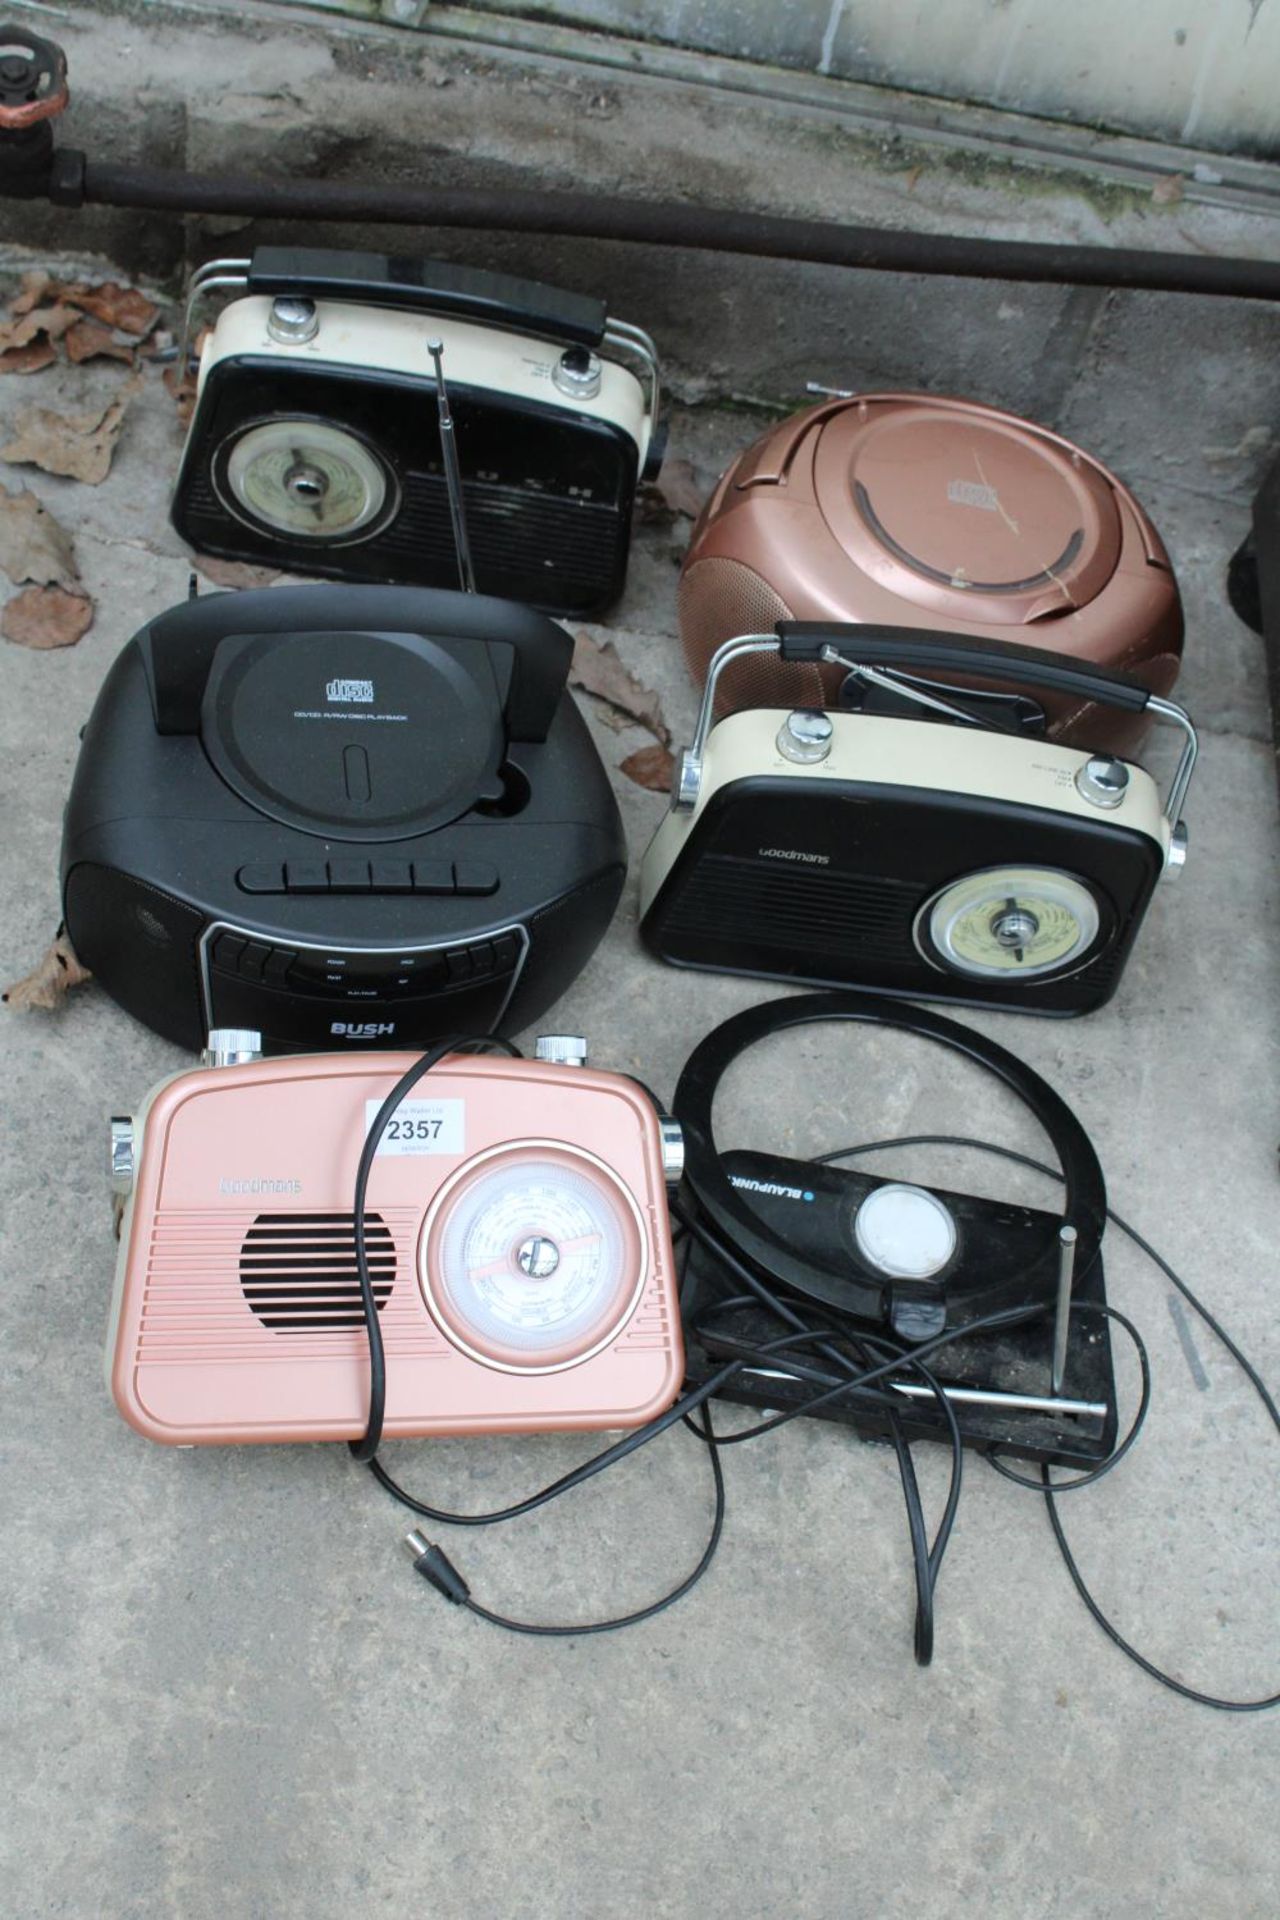 FIVE VARIOUS RADIOS AND CD PLAYERS